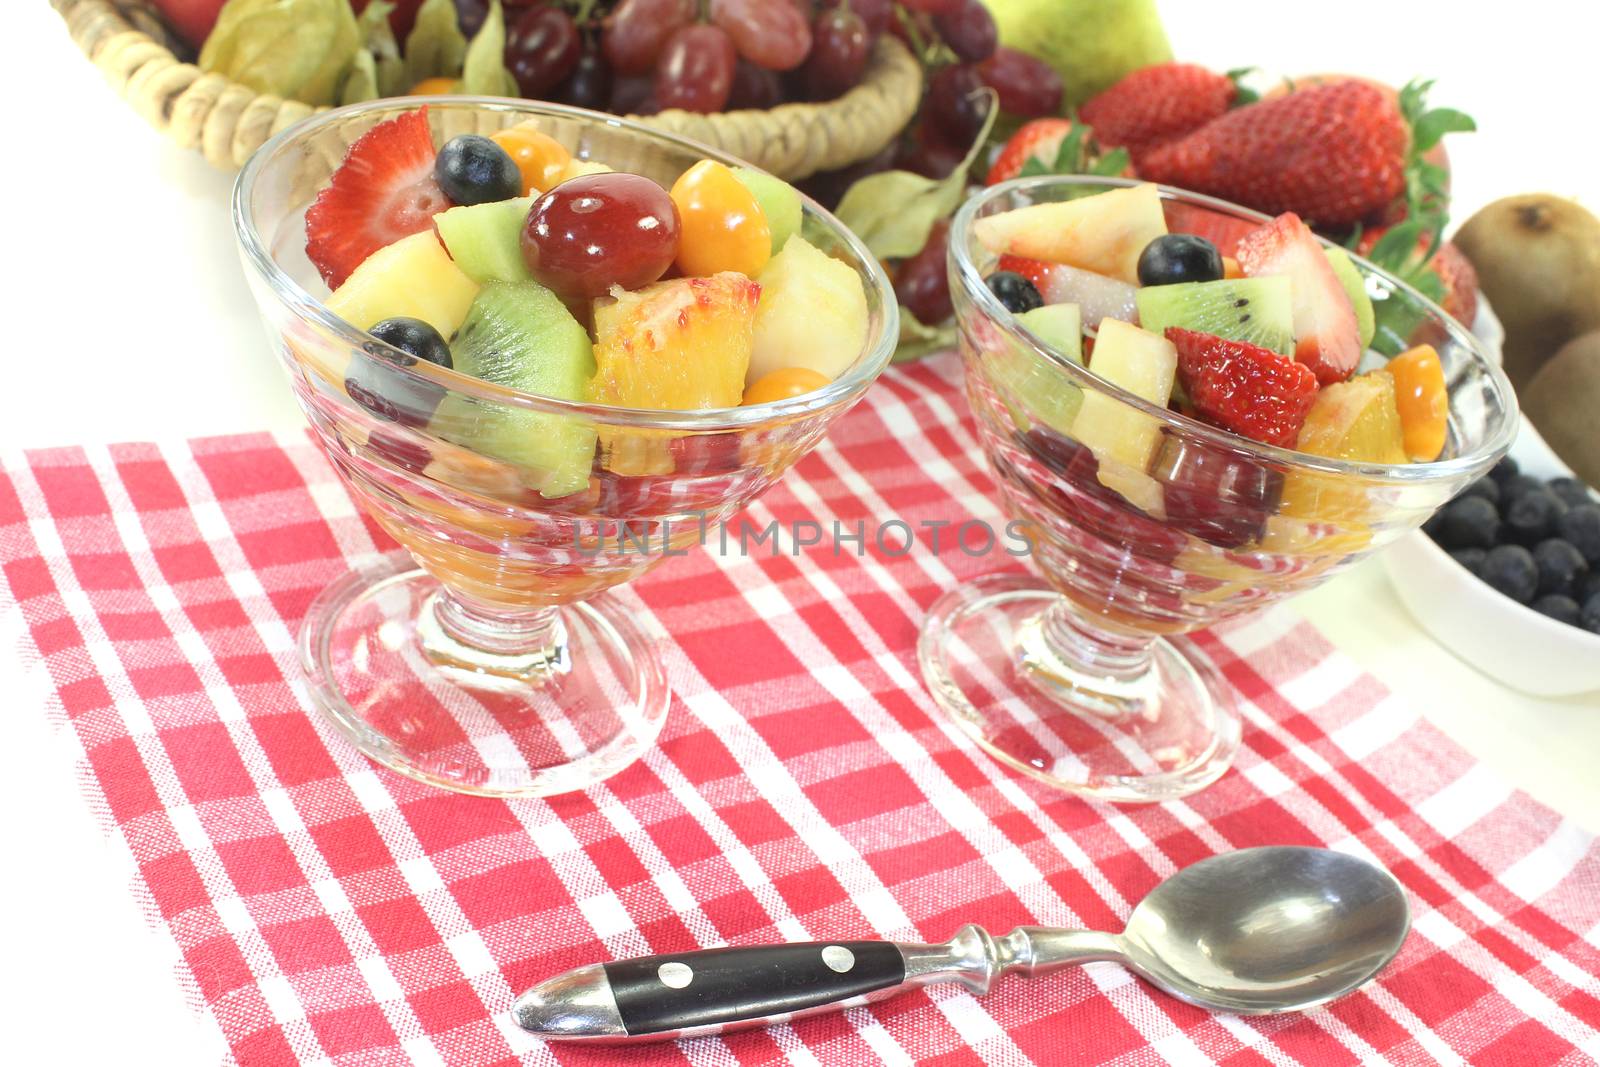 Fruit salad in a bowl on checkered napkin on a light background